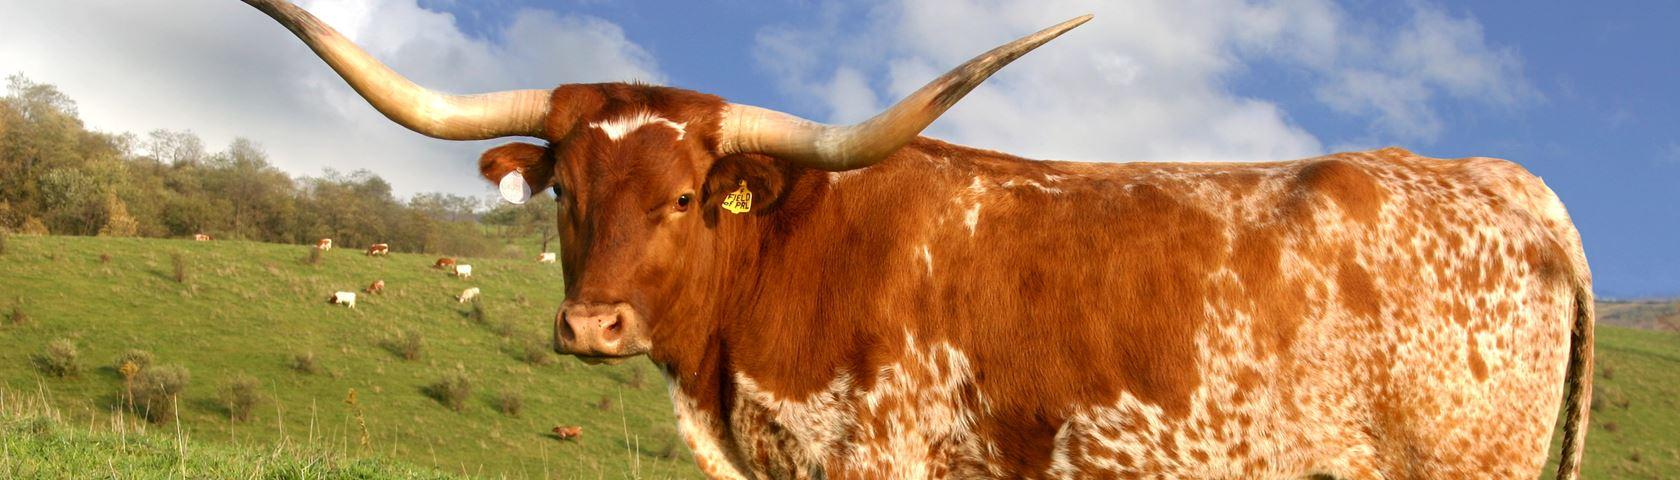 Texas Longhorn Cow • Image • WallpaperFusion